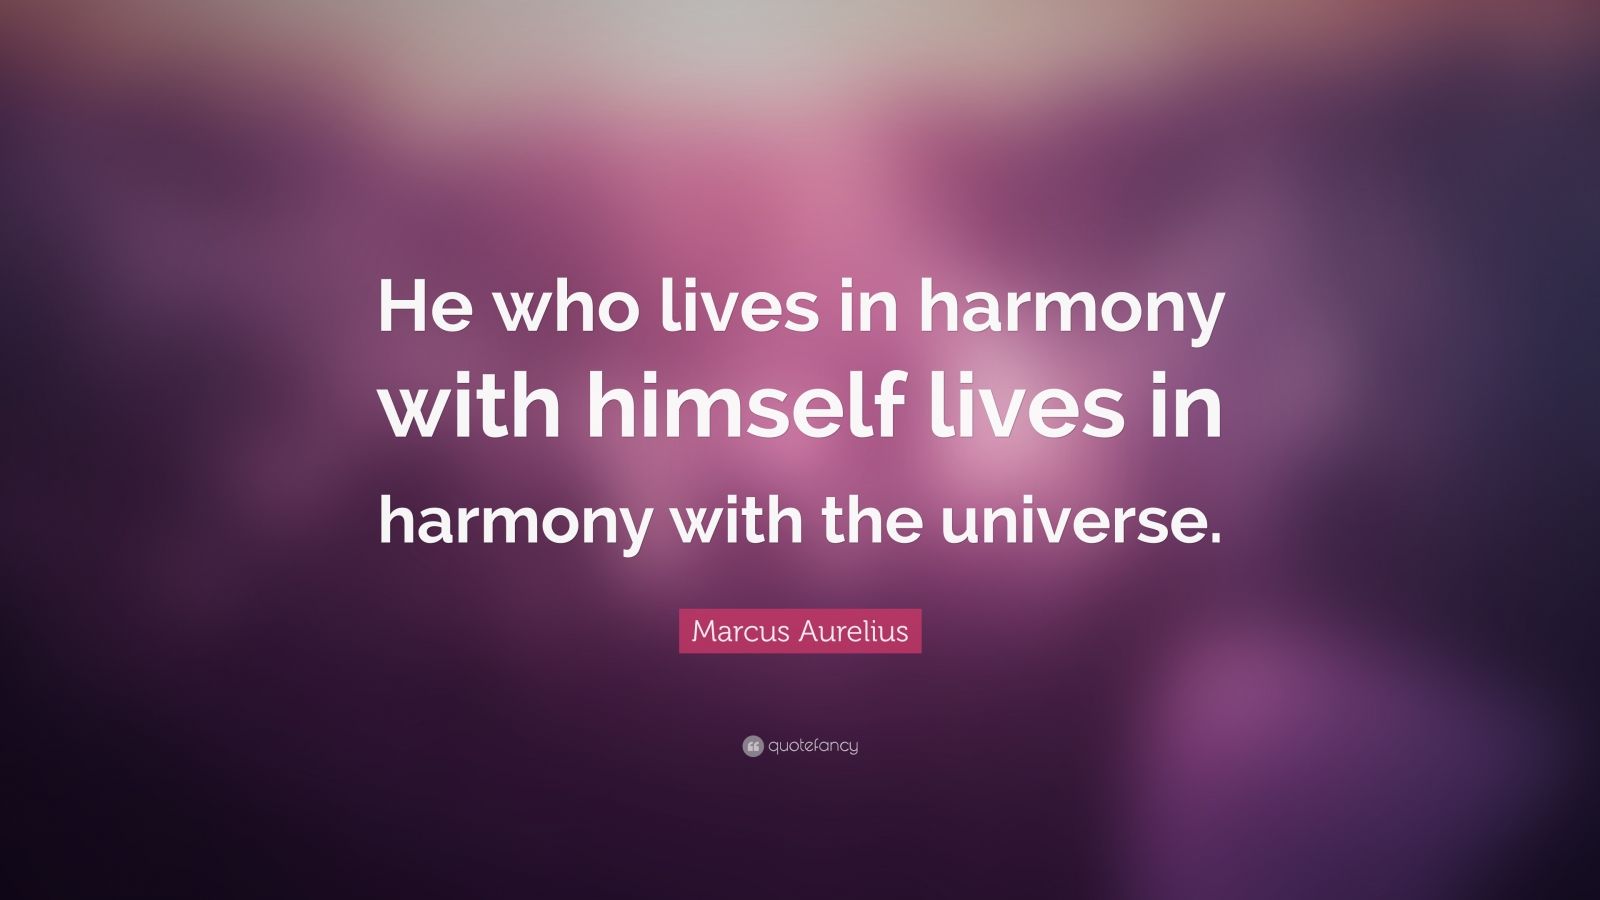 Marcus Aurelius Quote: “He who lives in harmony with himself lives in ...